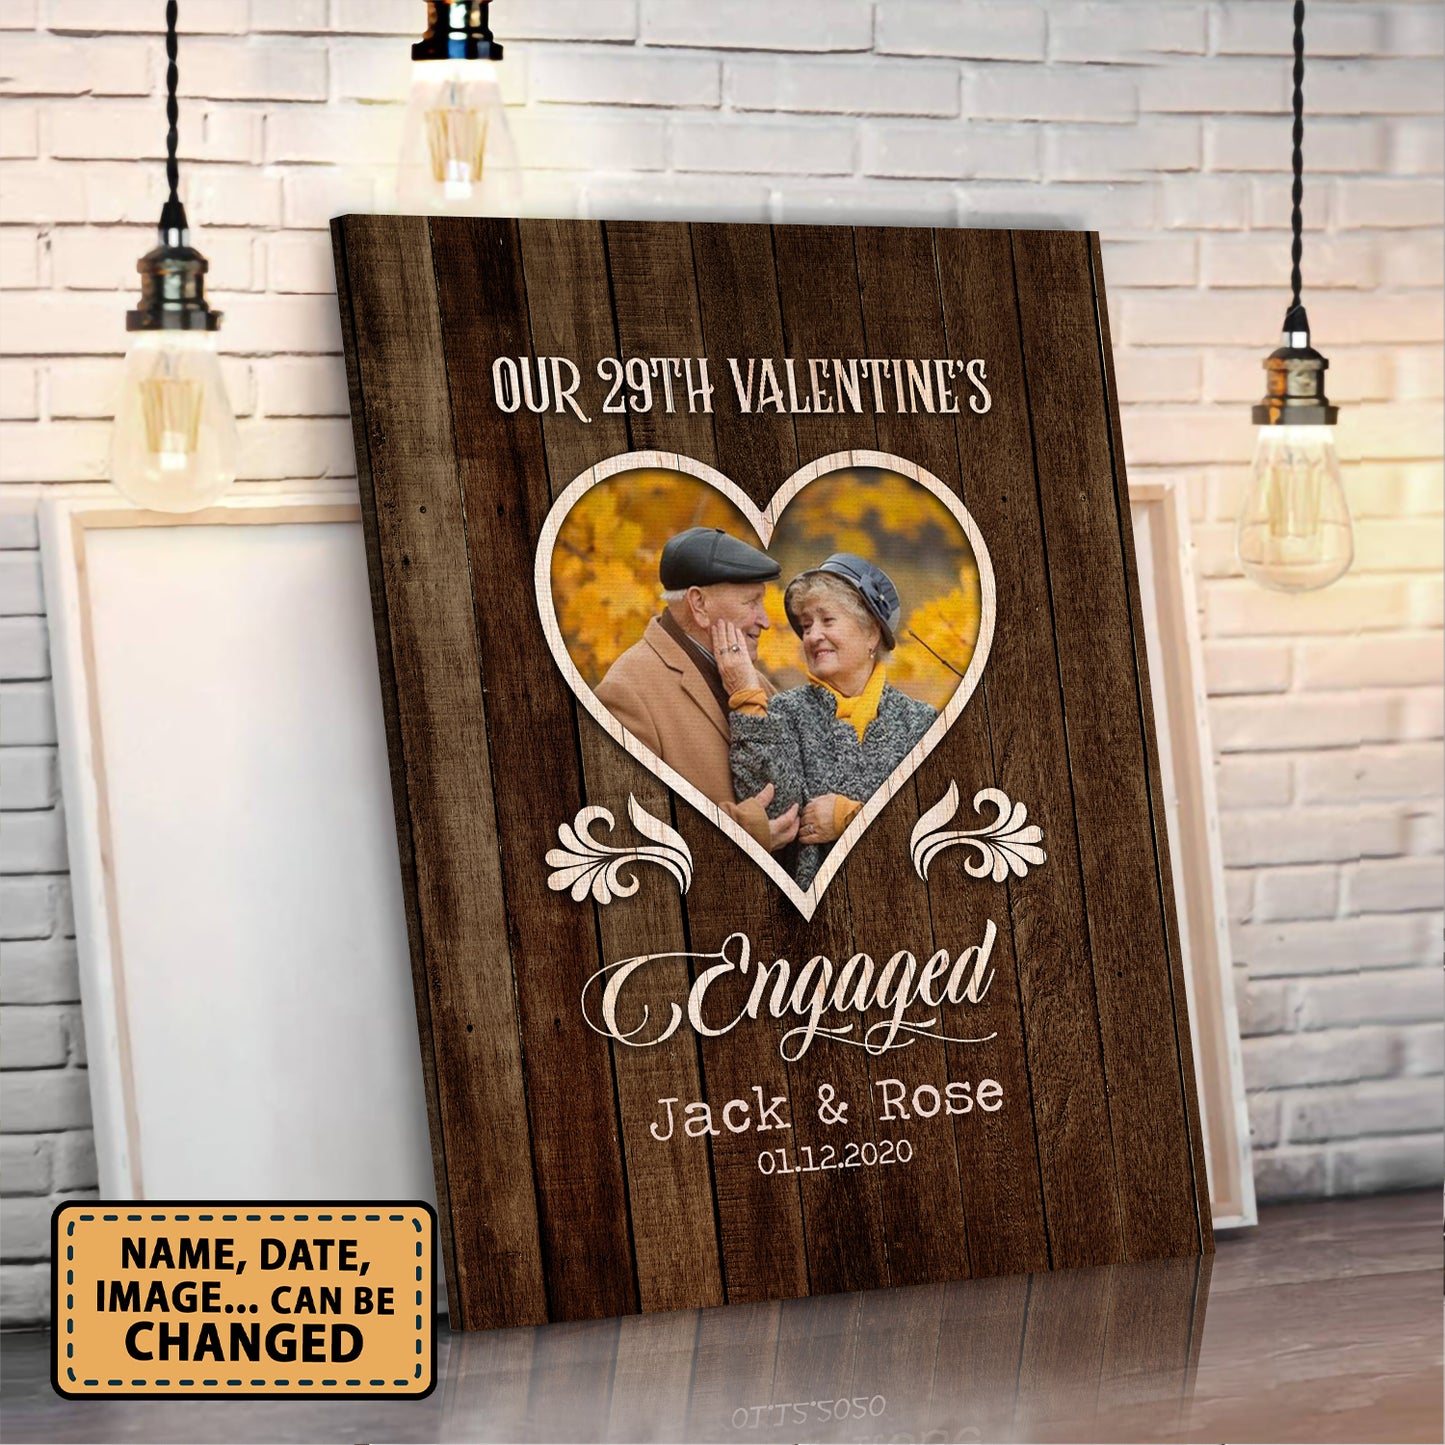 Our 29th Valentine’s Day Engaged Custom Image Anniversary Canvas